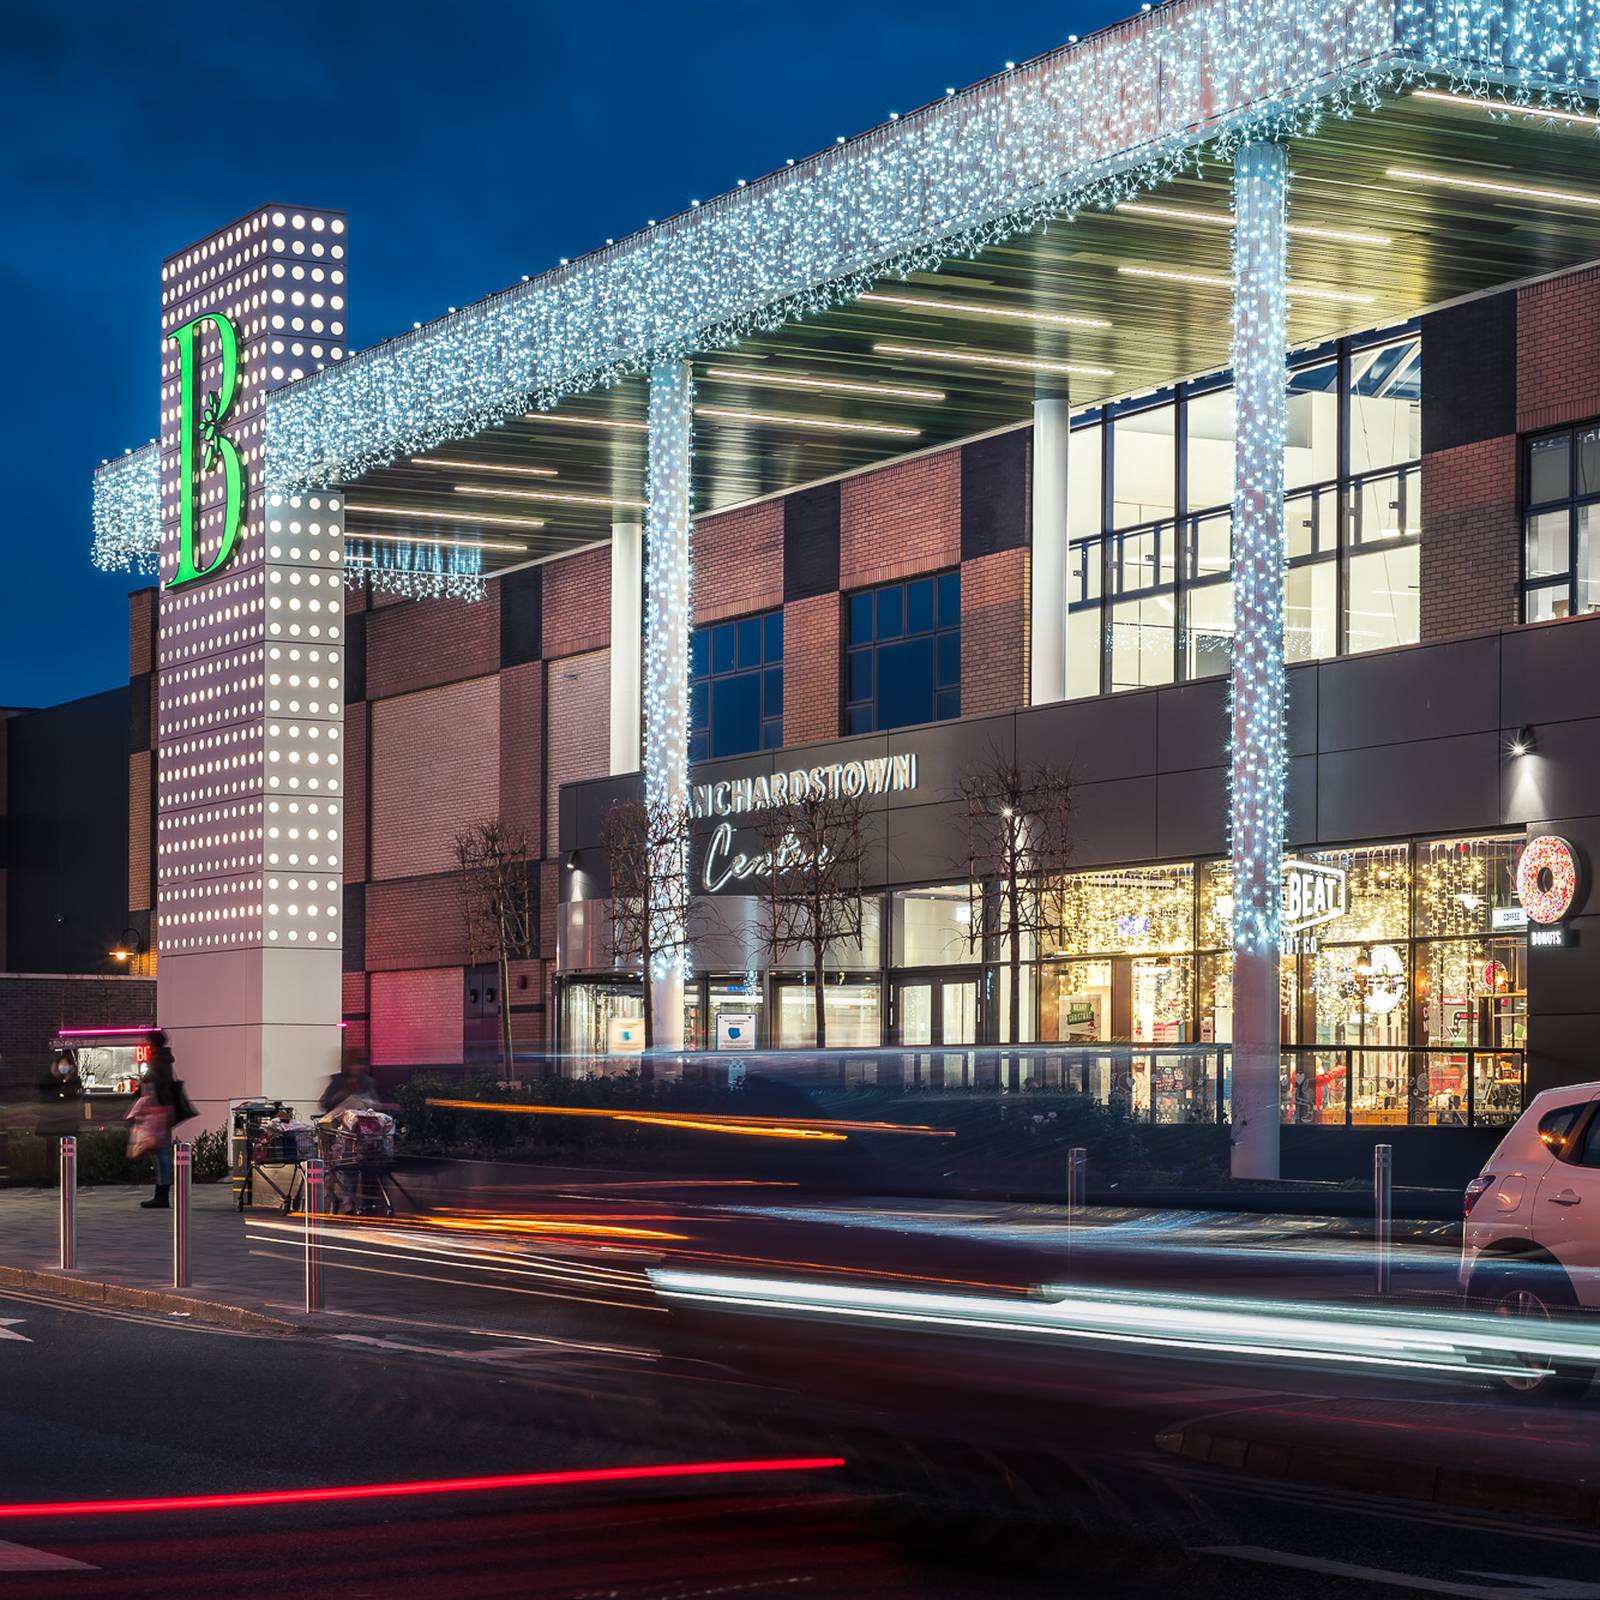 Why Wall Street is selling Ireland's best-known shopping malls